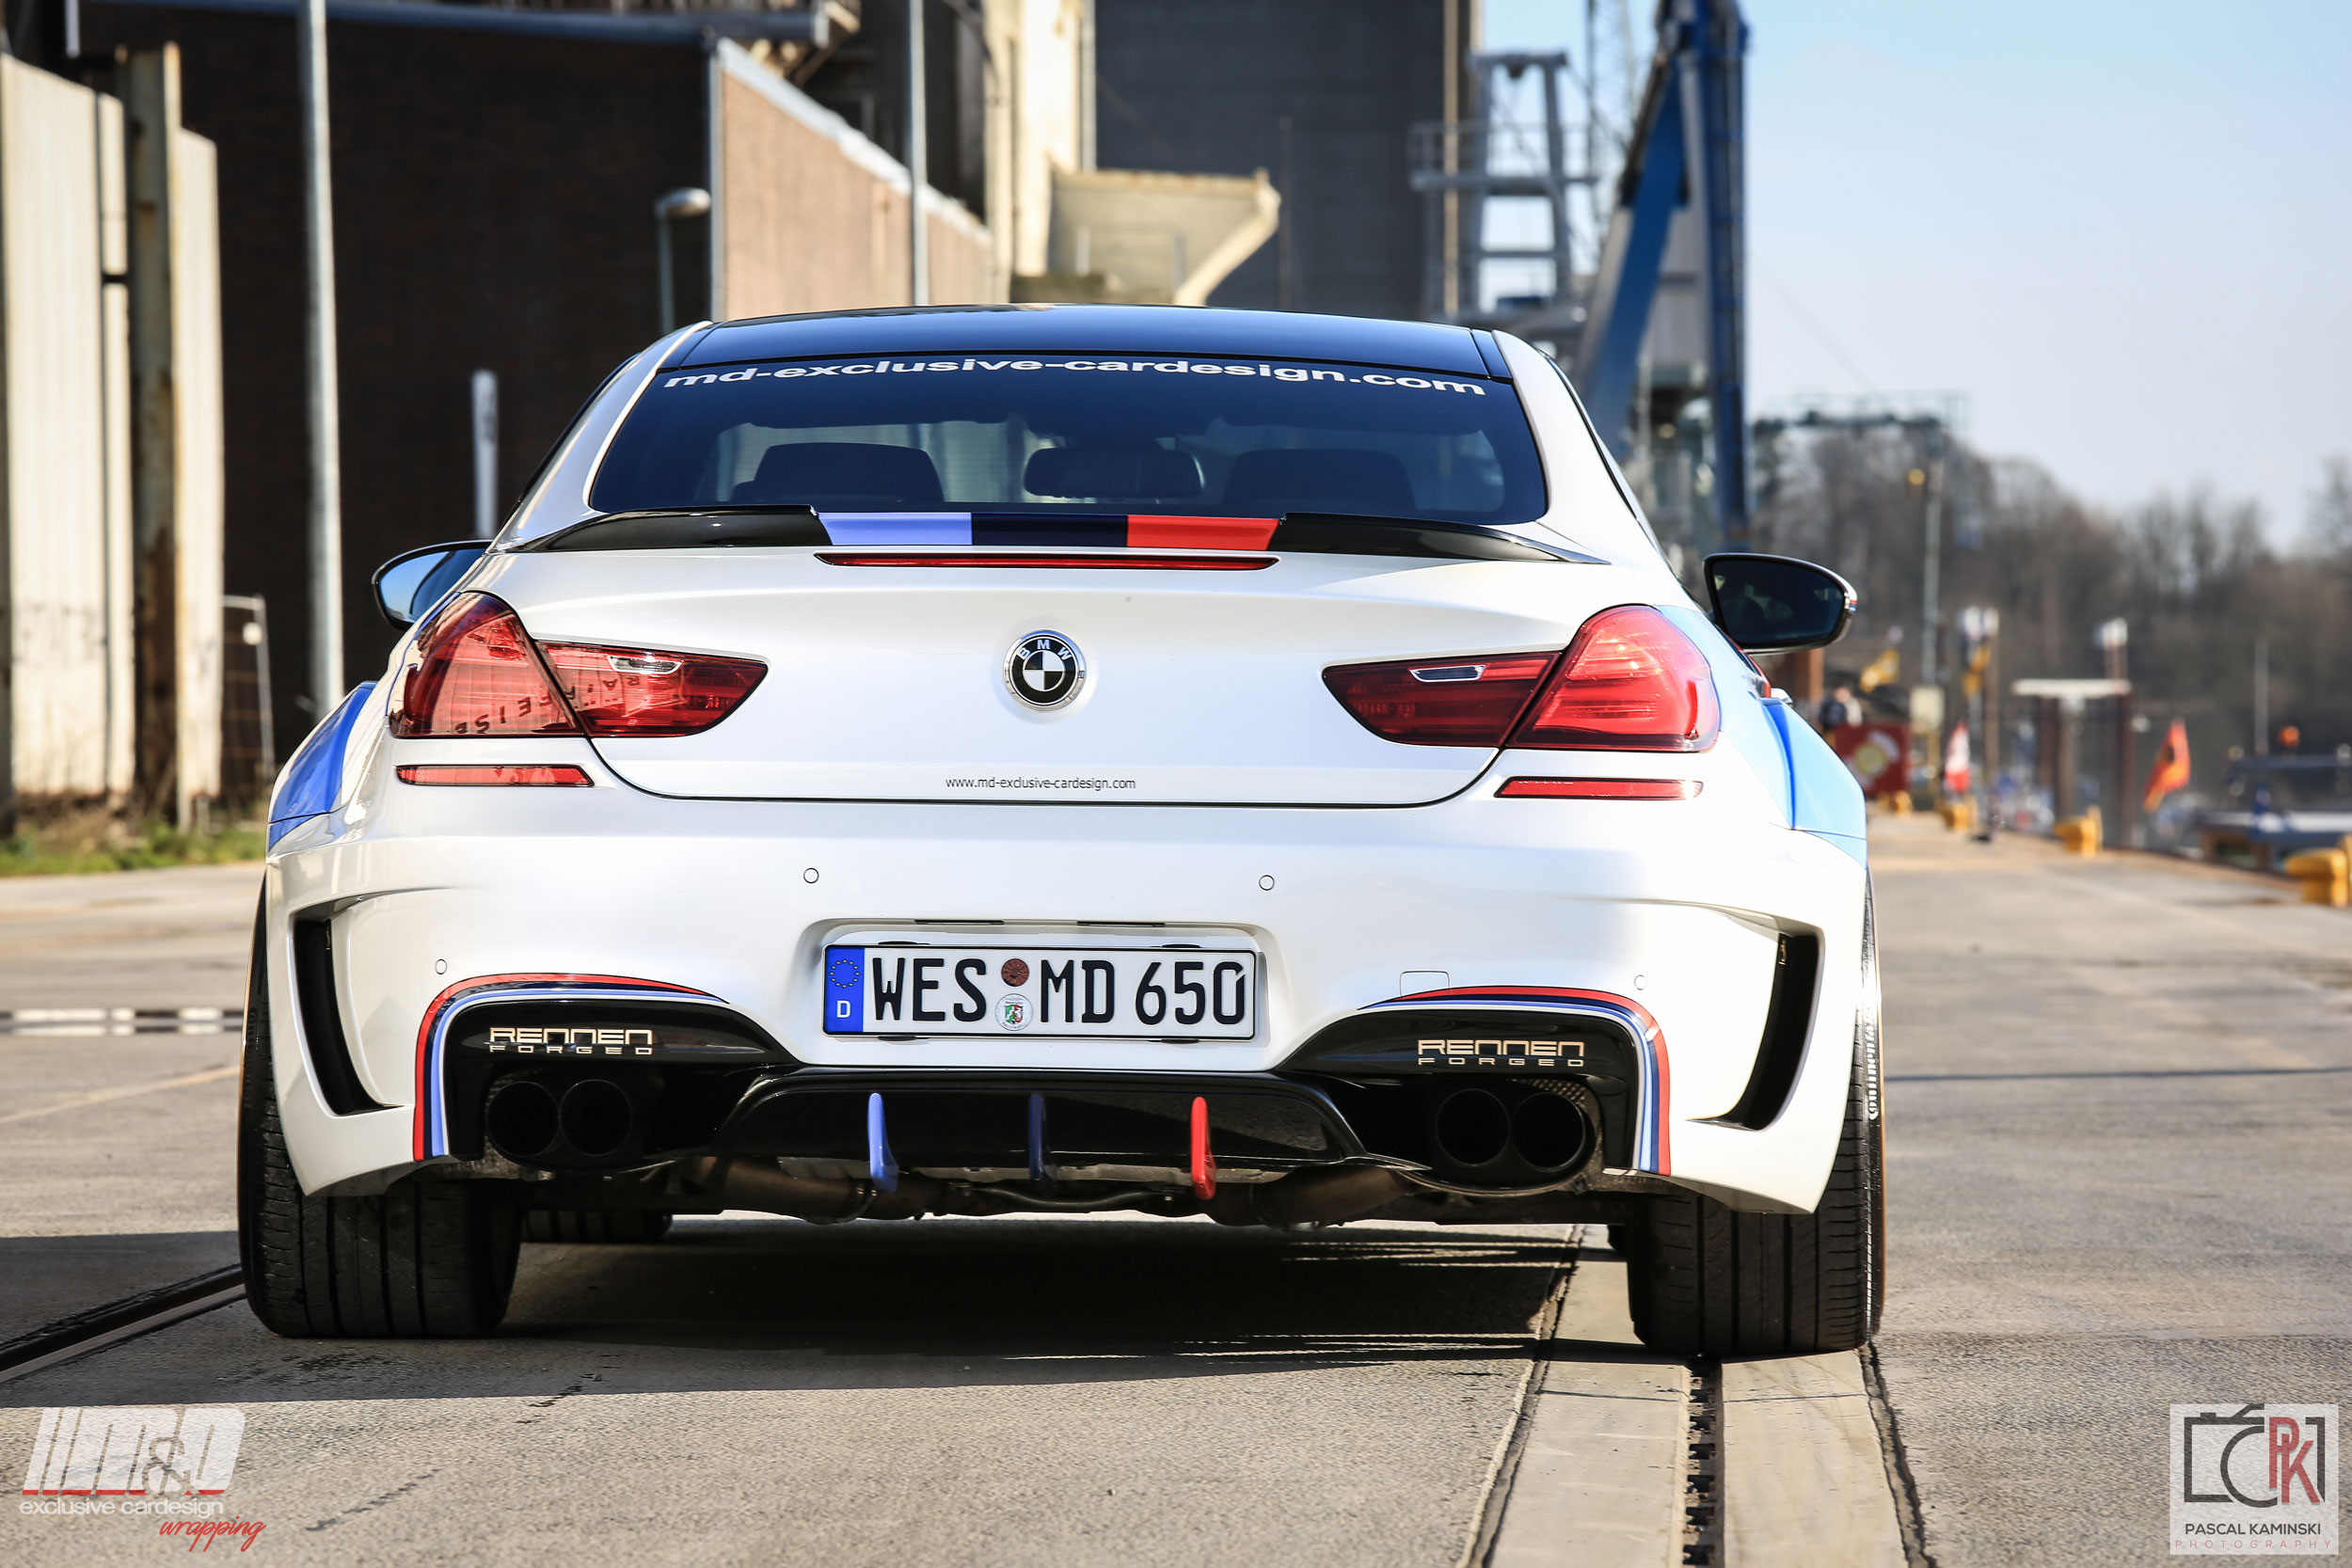 PD6XX WB Rear Trunk Spoiler for BMW 6-Series F12/F13/M6